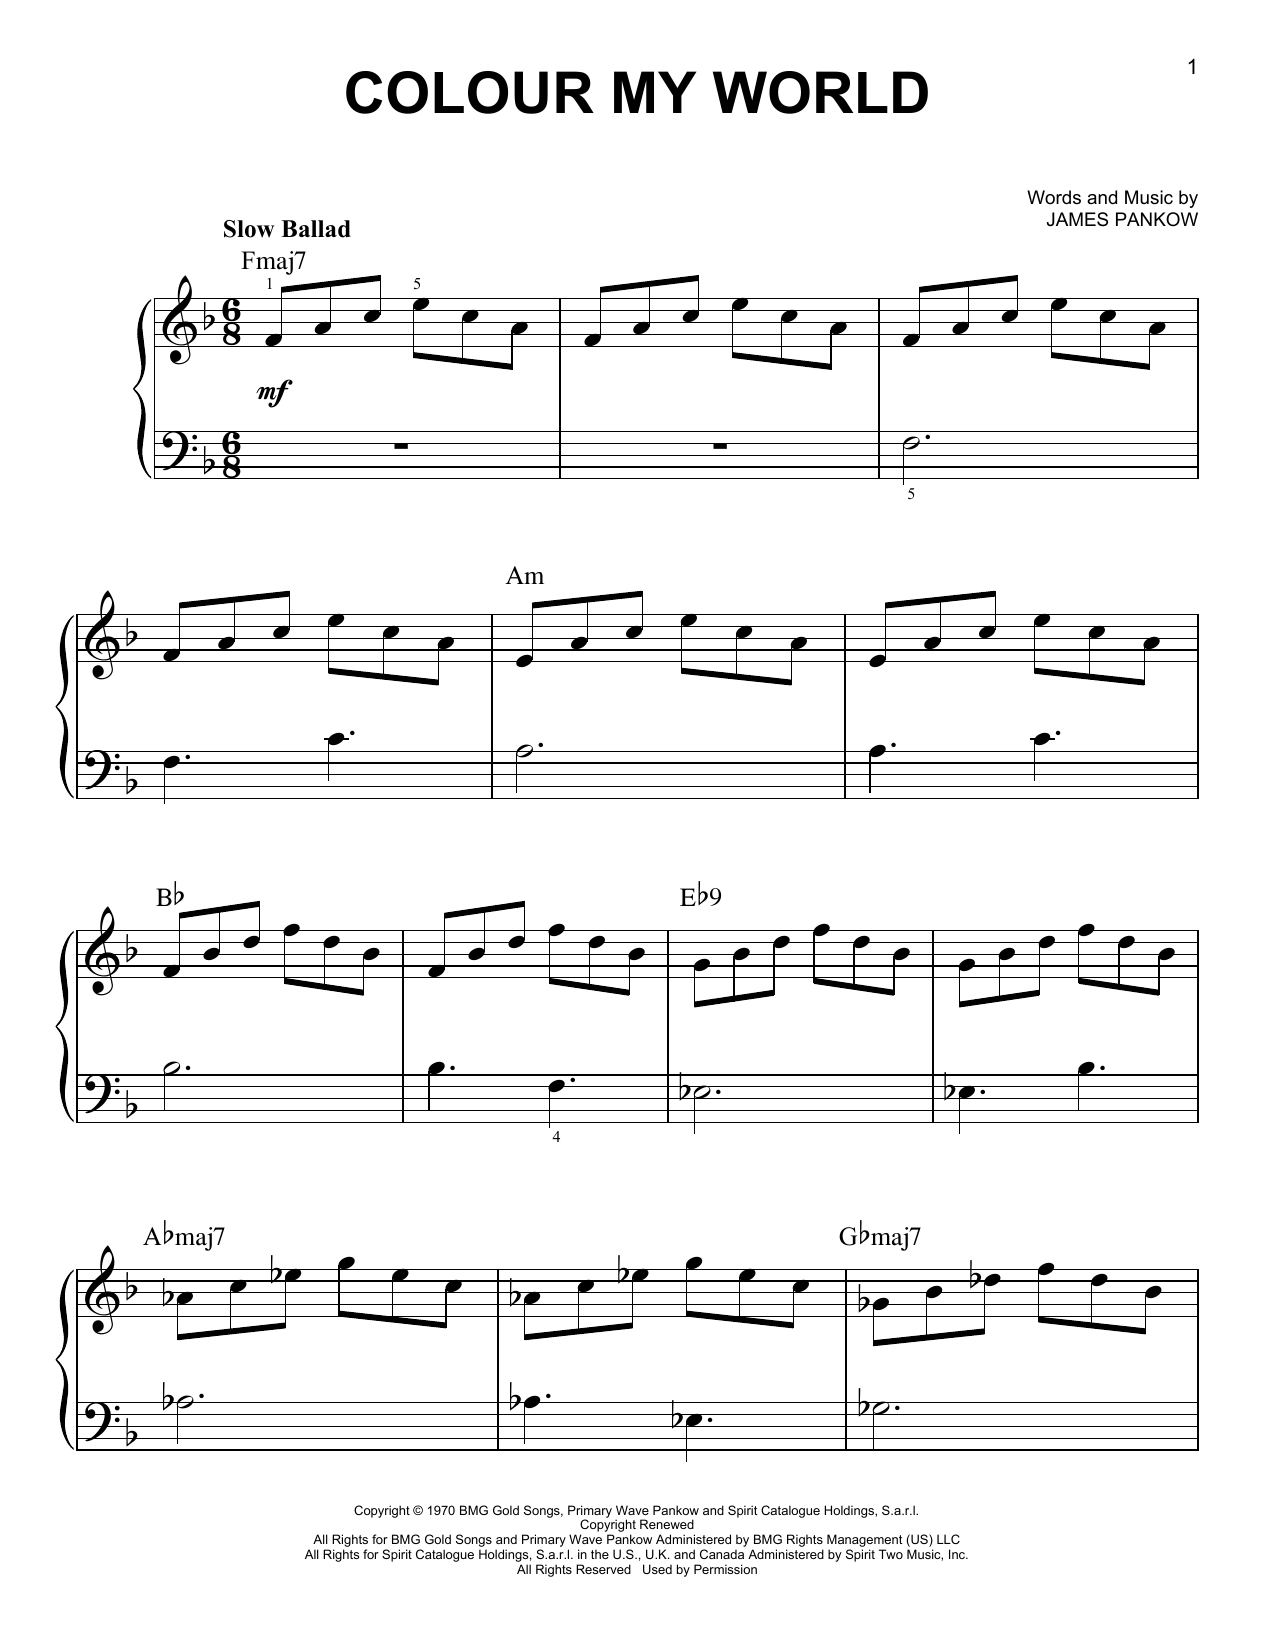 Chicago Colour My World sheet music notes and chords. Download Printable PDF.